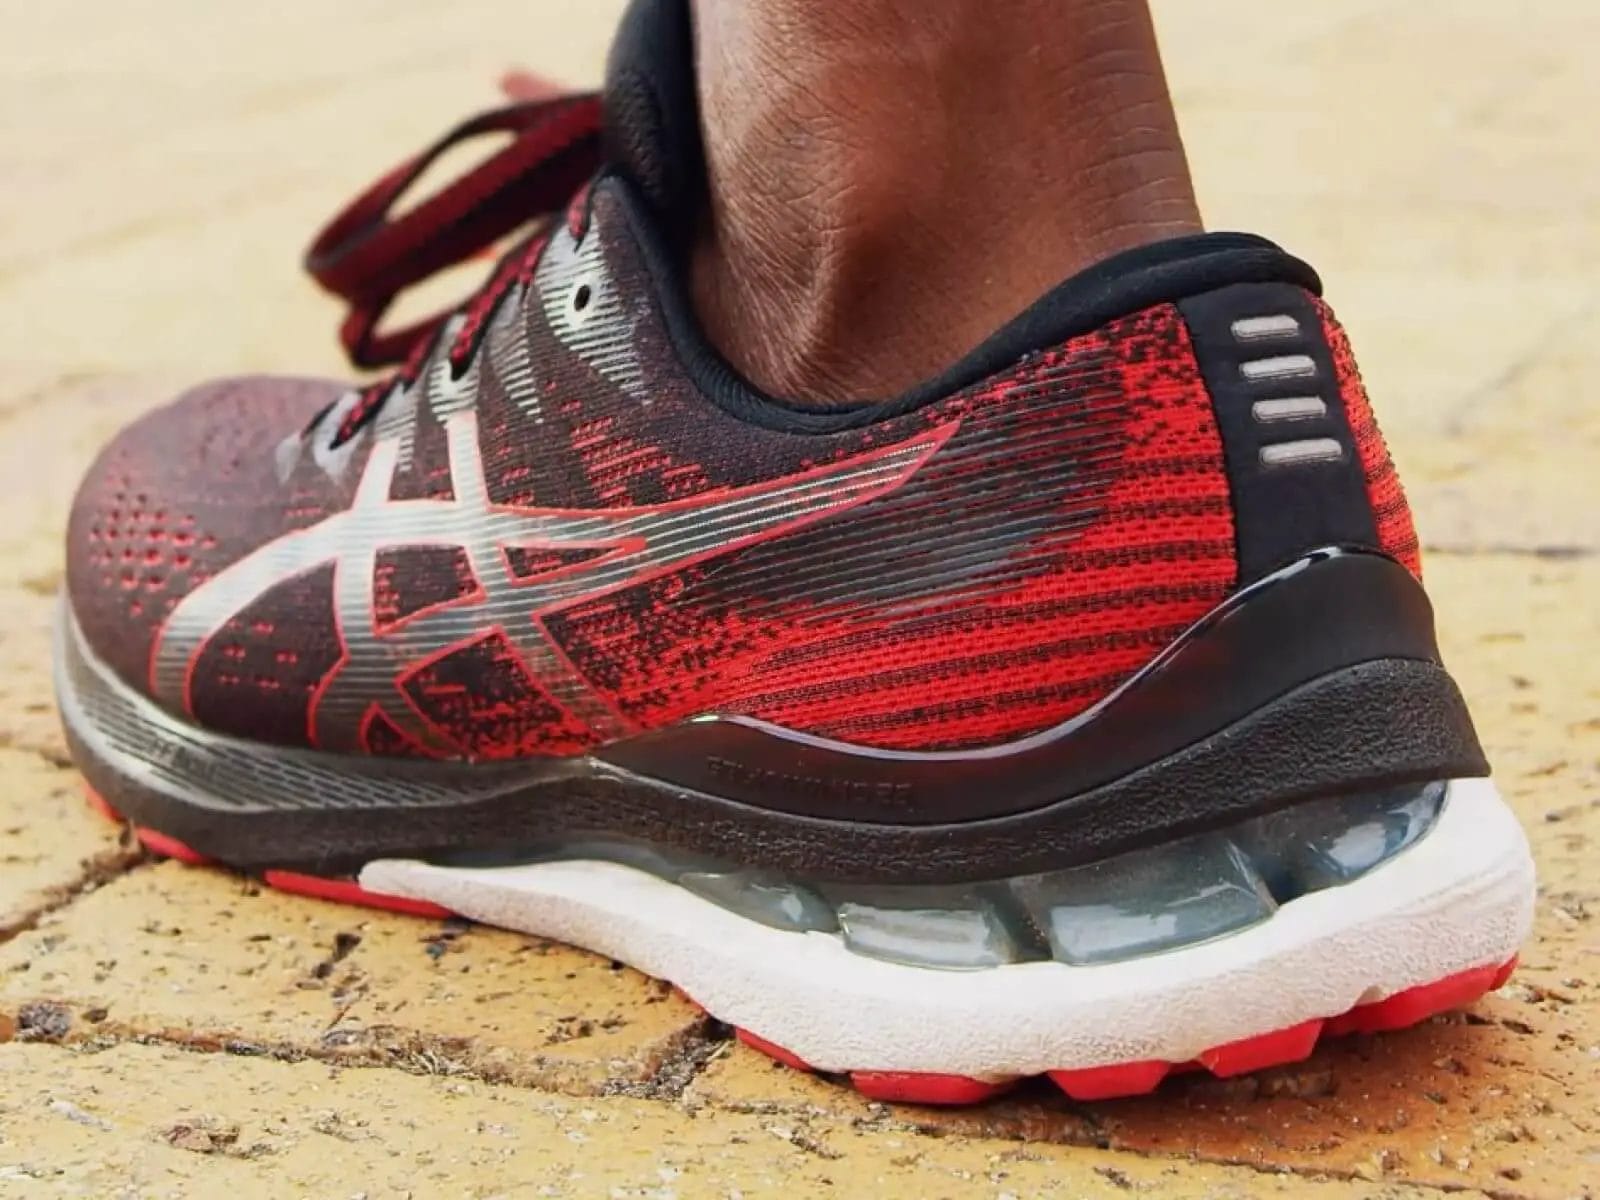 Details of the rear of the asics gel kayano 28 shoe while someone is running on pavement.